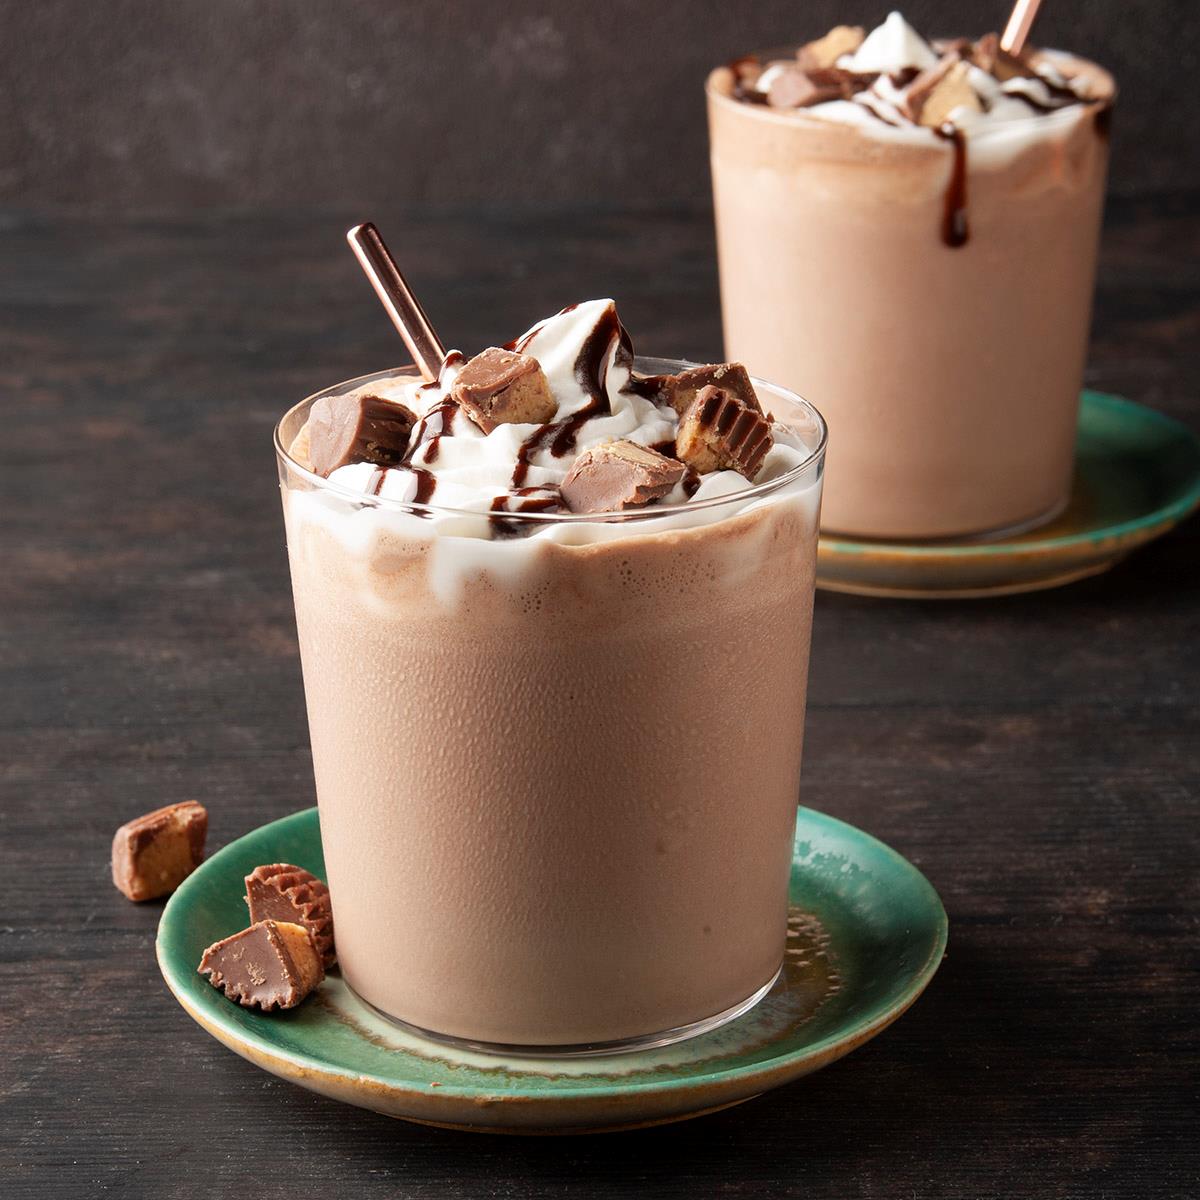 Chocolate Peanut Butter Shakes Recipe: How to Make It